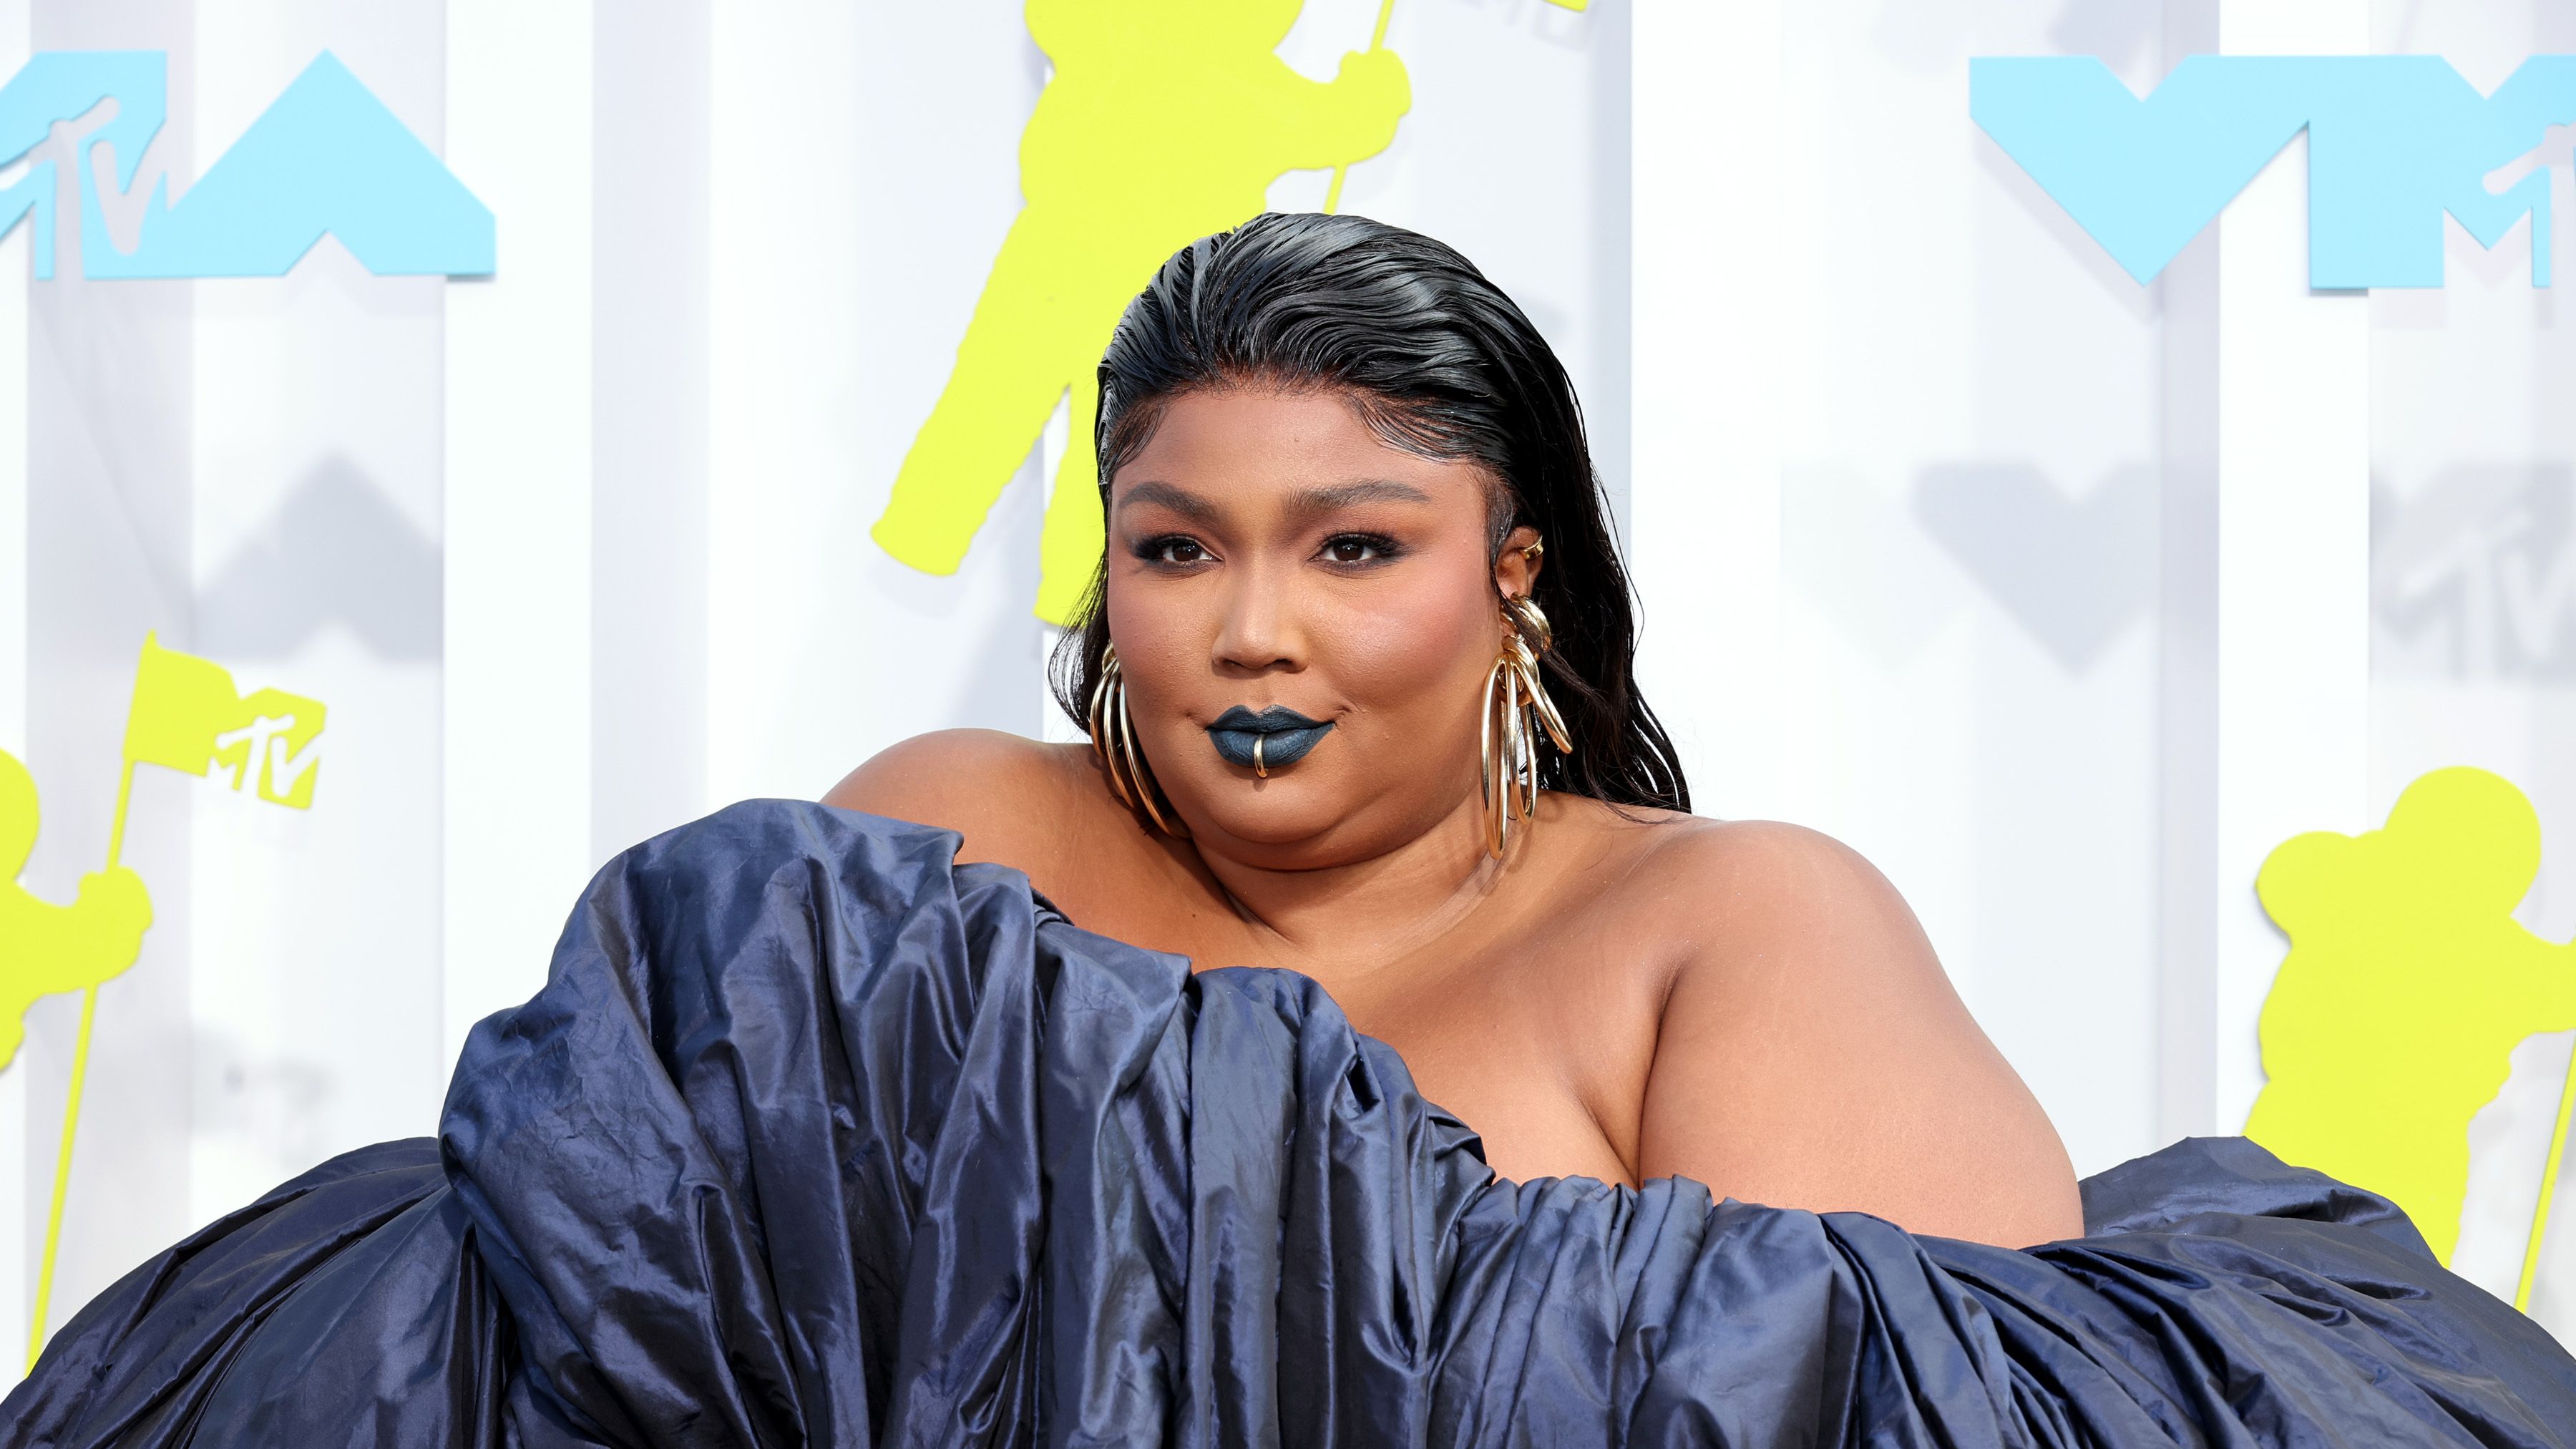 Lizzo Is Enchanting in a Billowing Iridescent Gown at the 2022 MTV